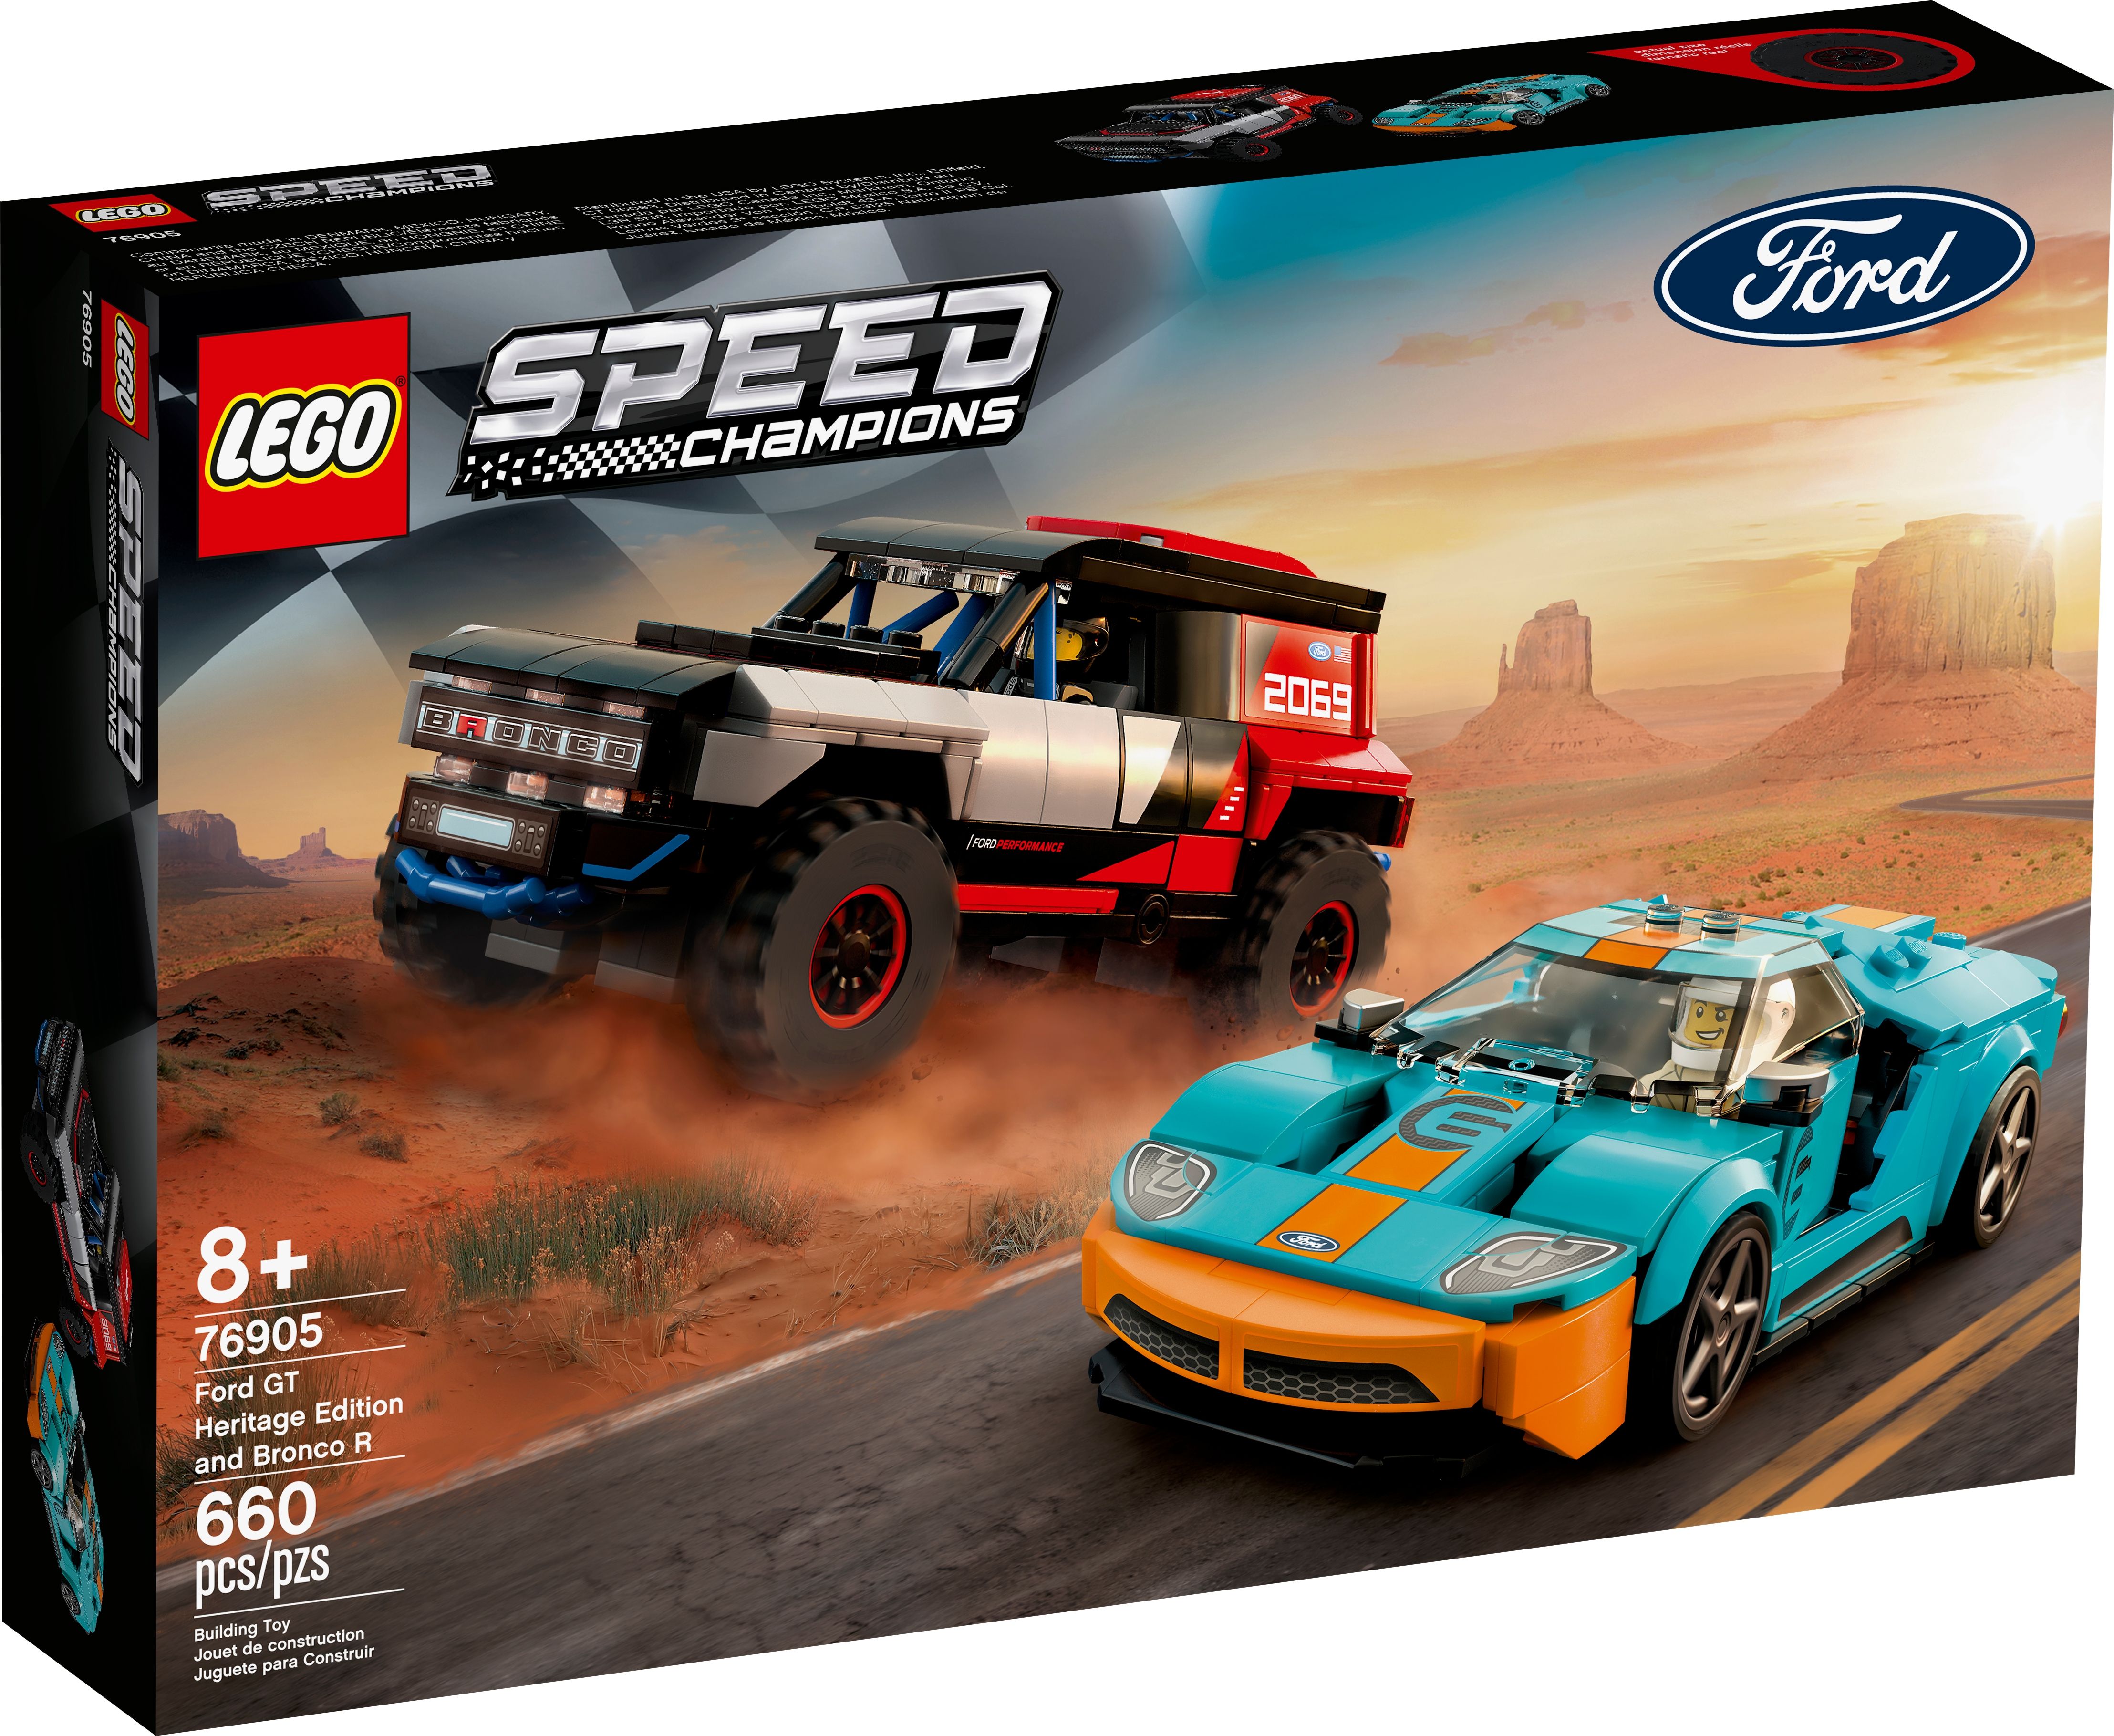 Lego speed champions ford